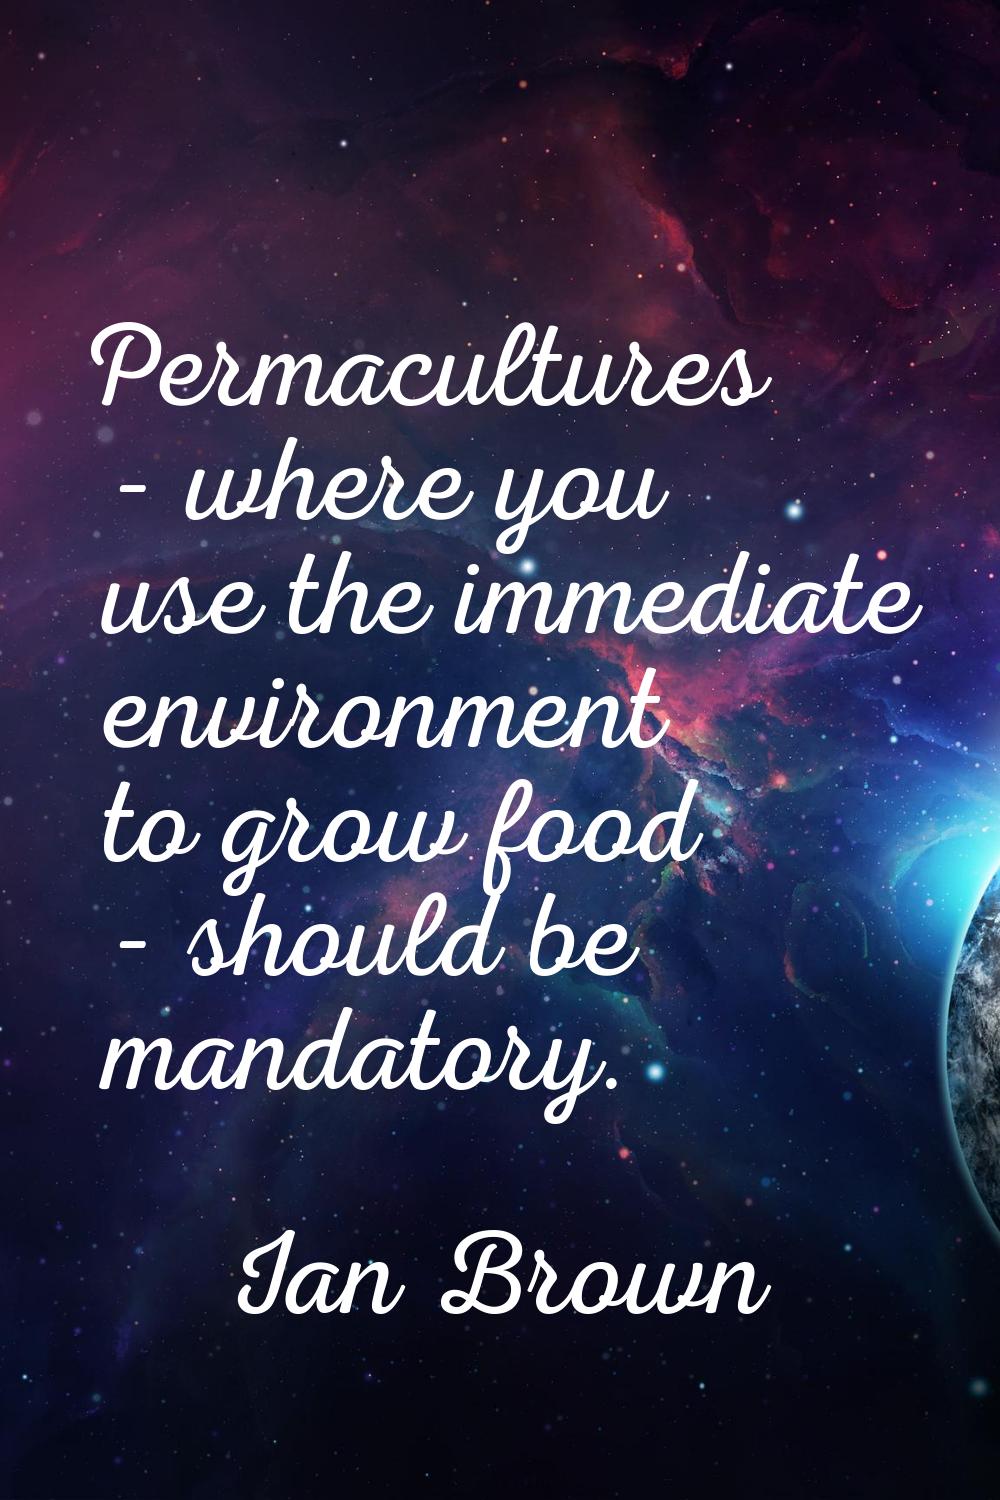 Permacultures - where you use the immediate environment to grow food - should be mandatory.